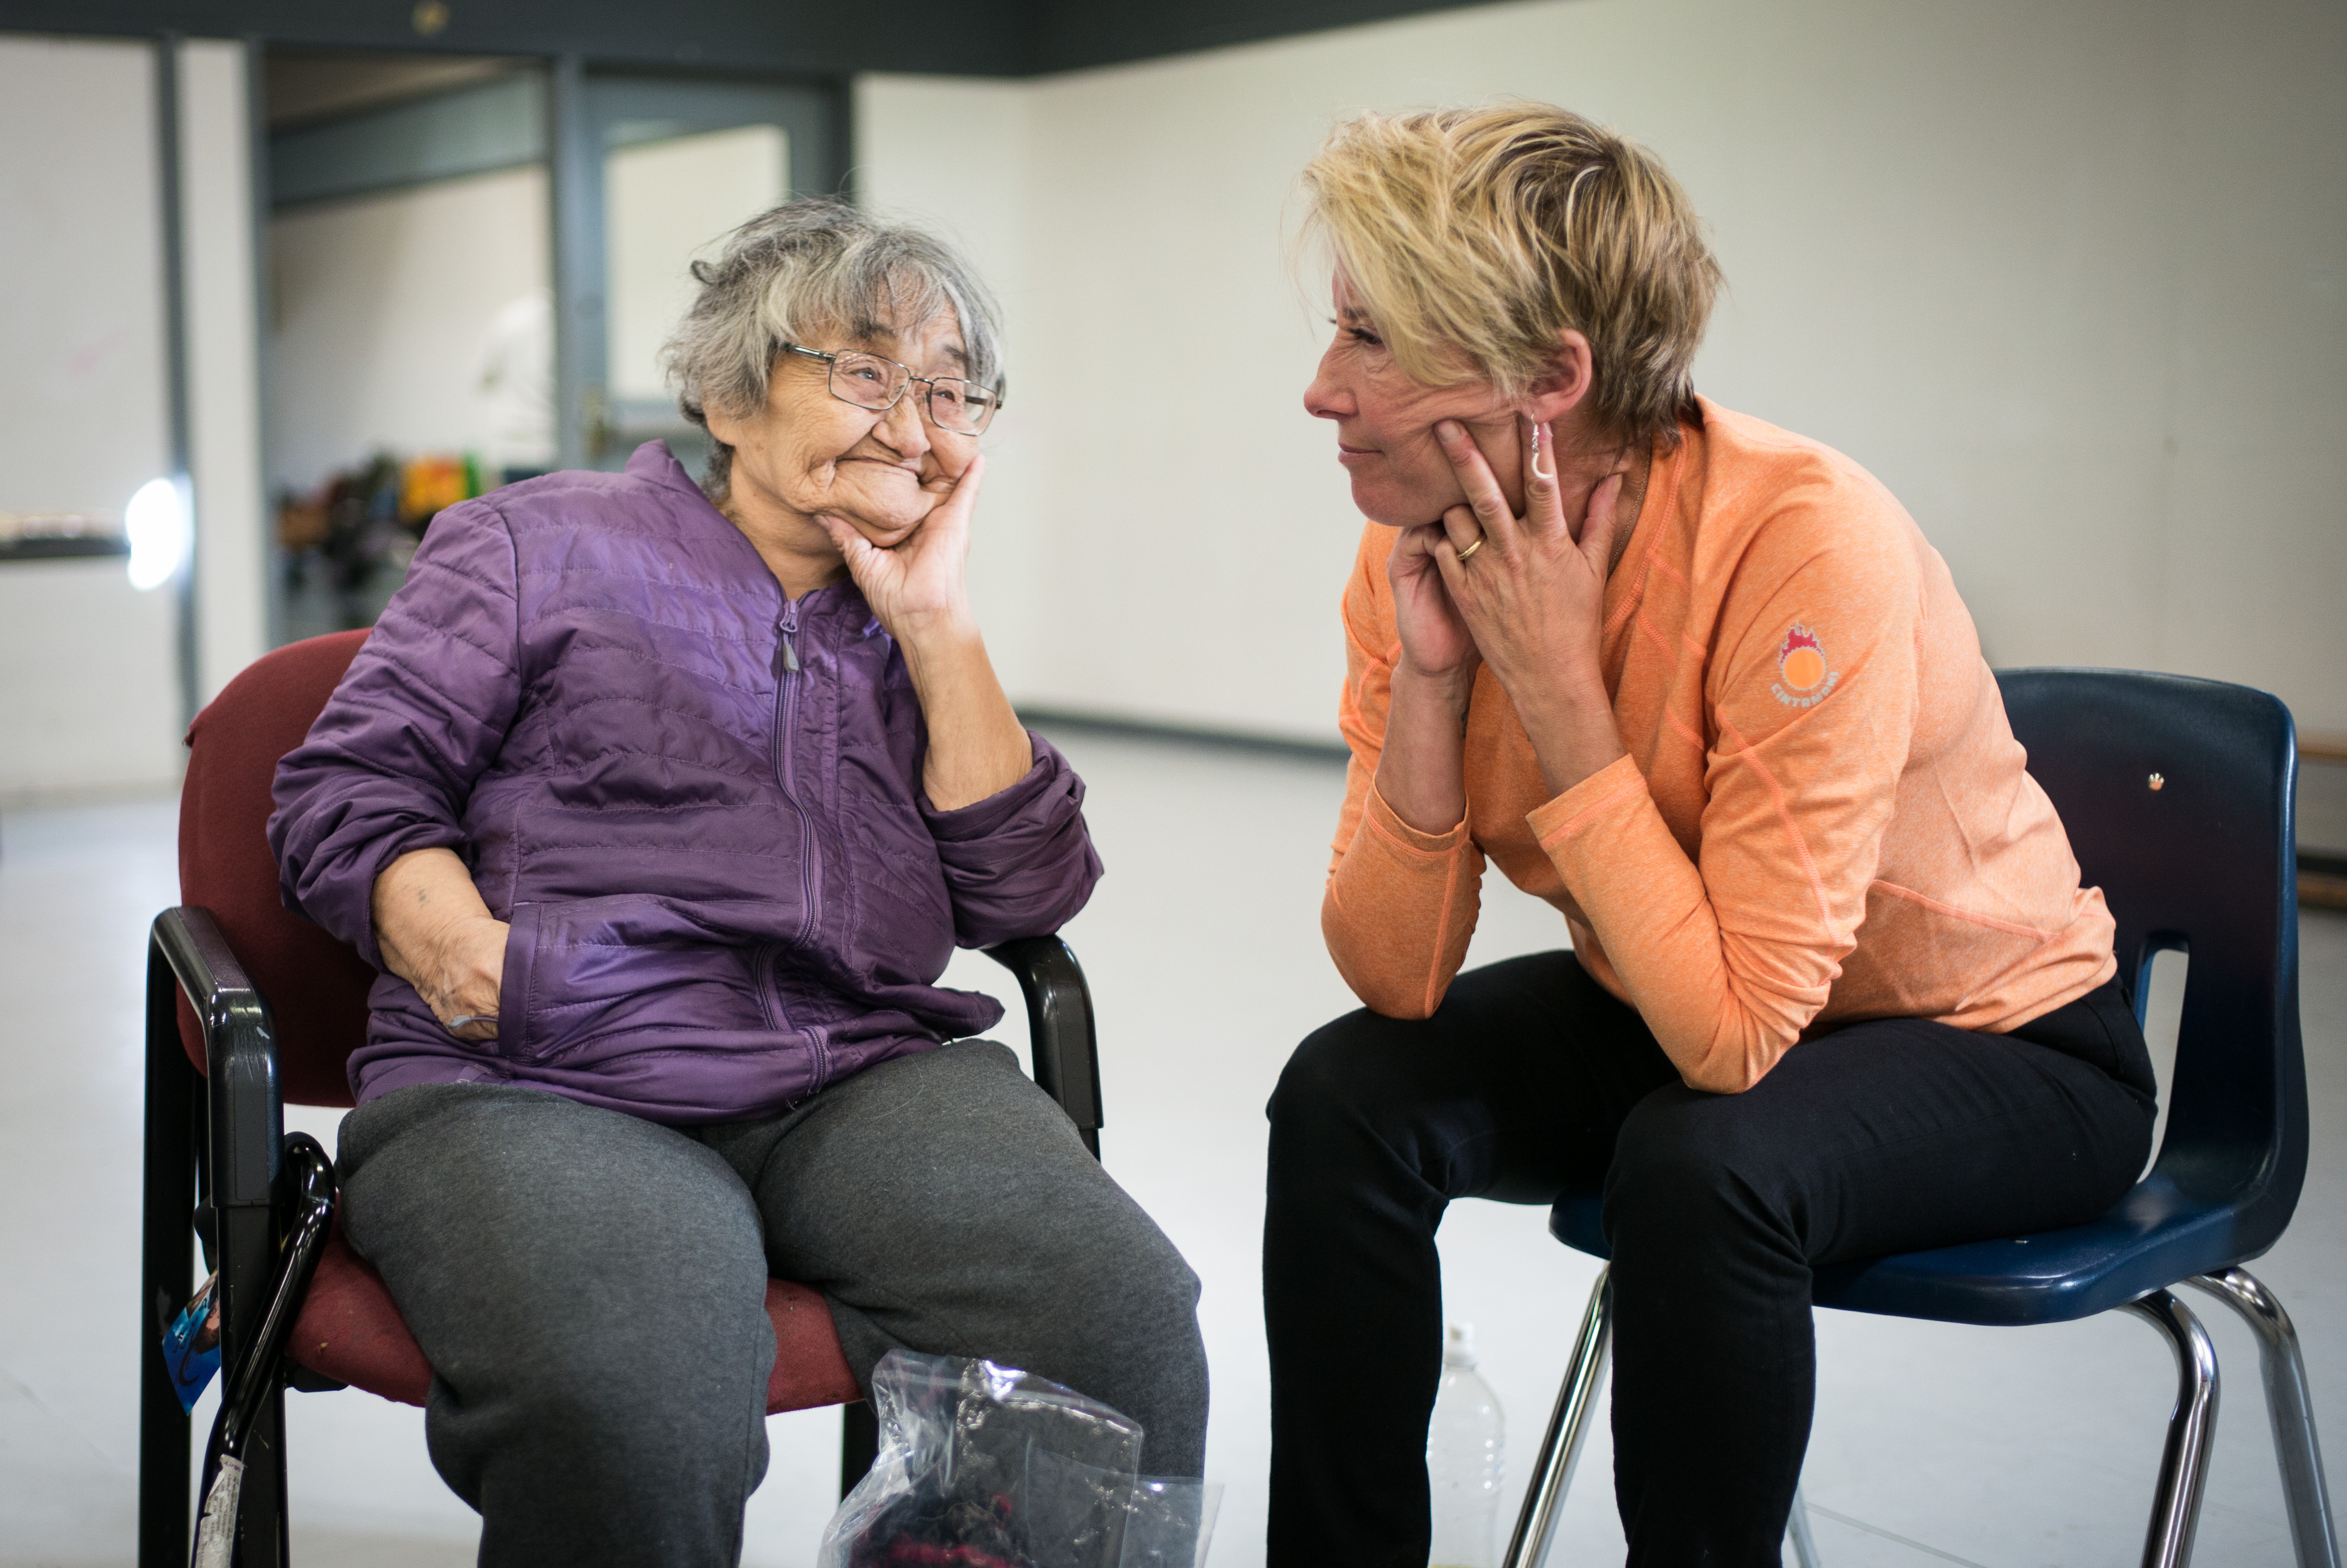 Clyde River elder Iga Palluq speaks with Emma Thompson at the Clyde River community center. (Greenpeace)